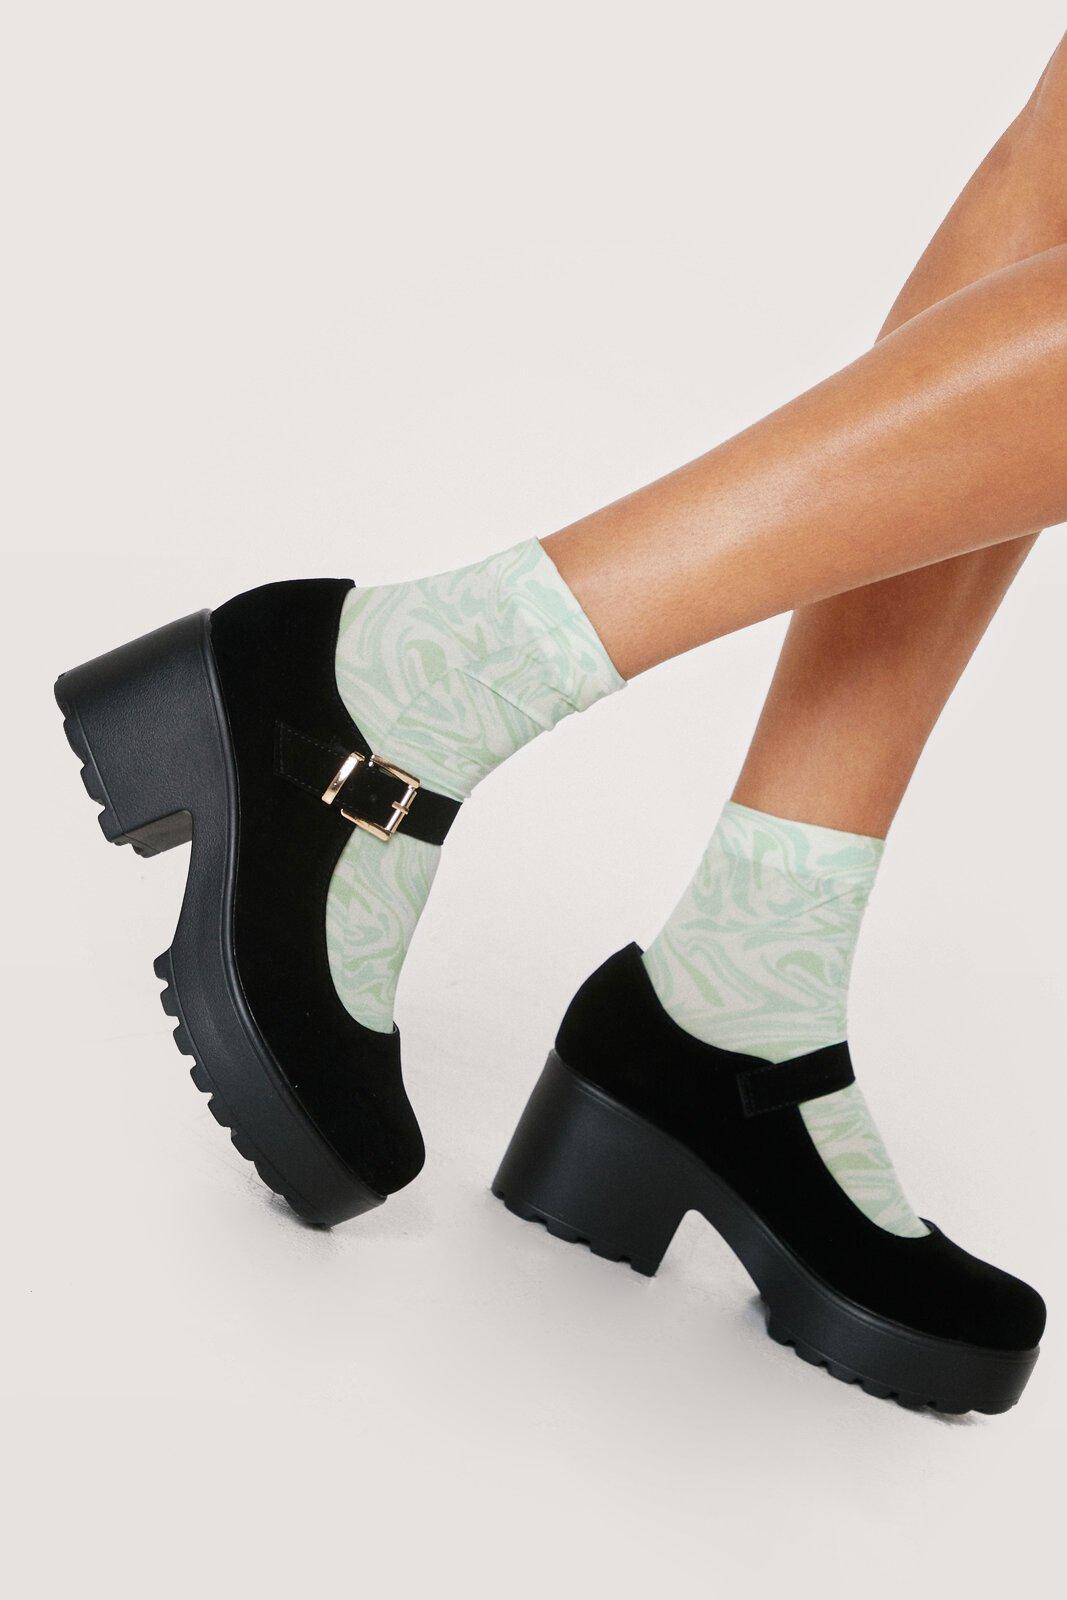 black suede mary jane shoes